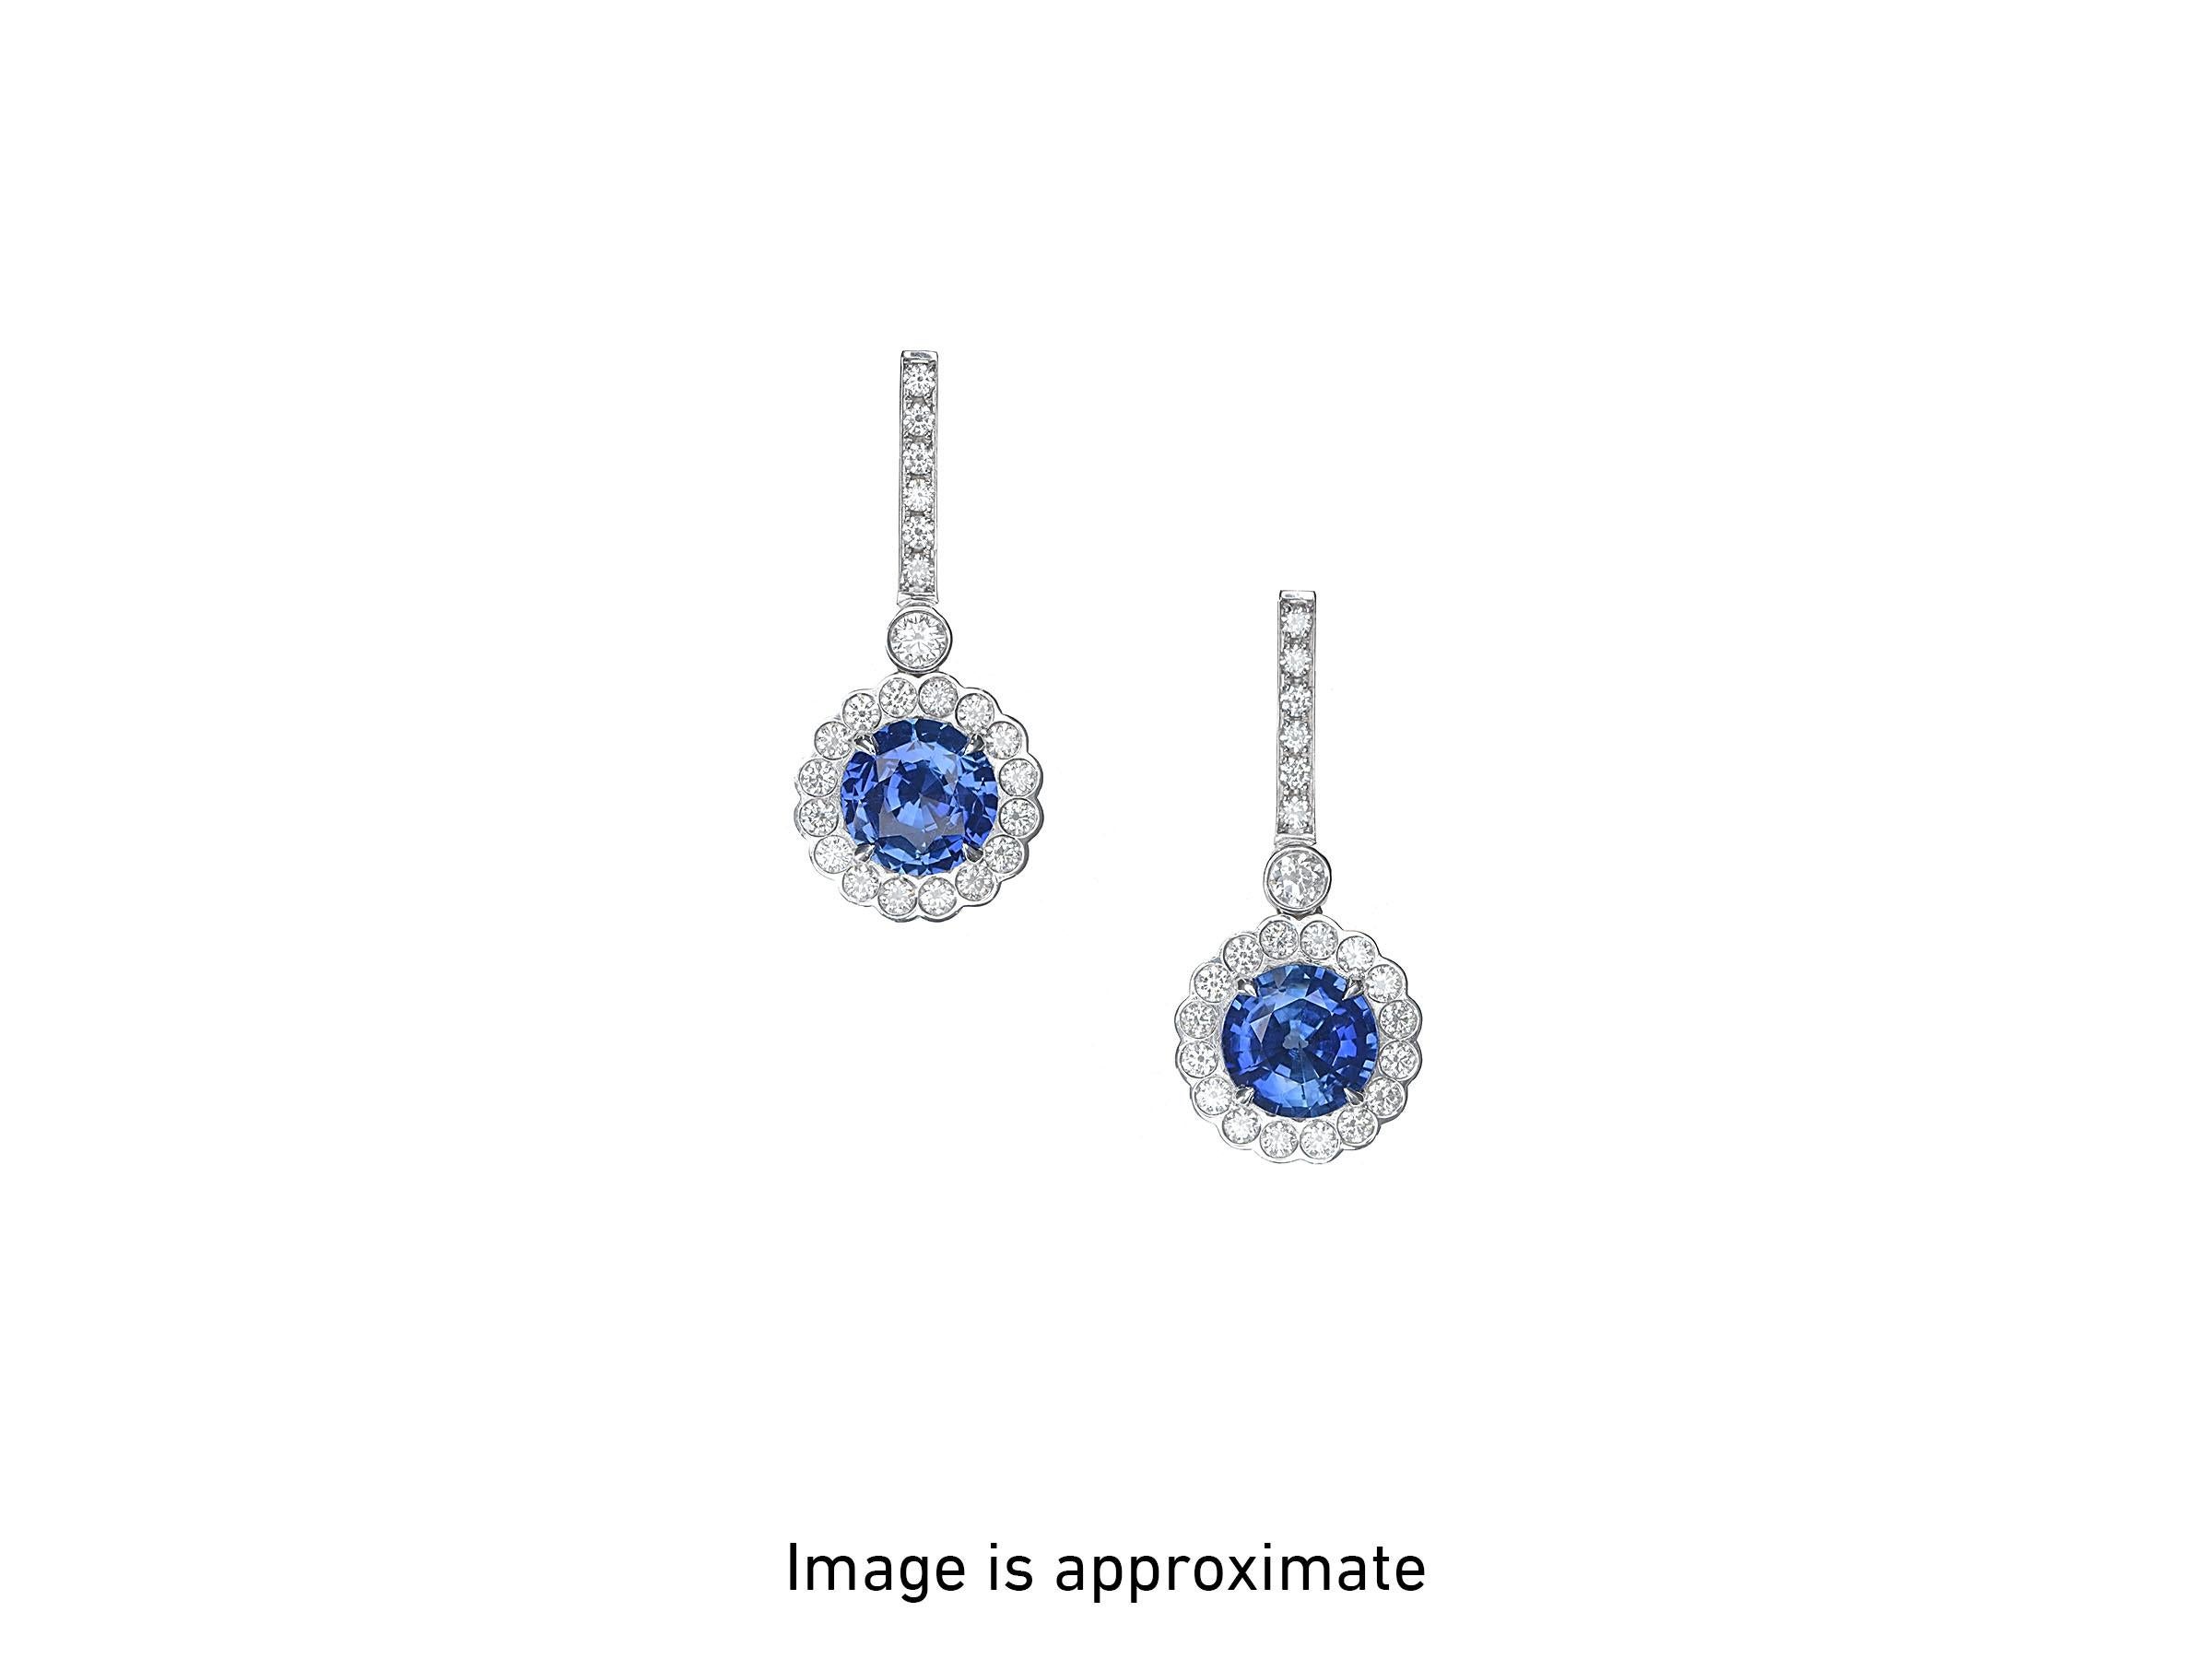 A classic pair of ”Princess Diana style” earrings, featuring 6.37 carats of Ceylon blue sapphires dazzle in divine platinum.

The gorgeous sapphires are floating inside sparkling white halos of high-quality, scallop-set, round brilliant cut diamonds